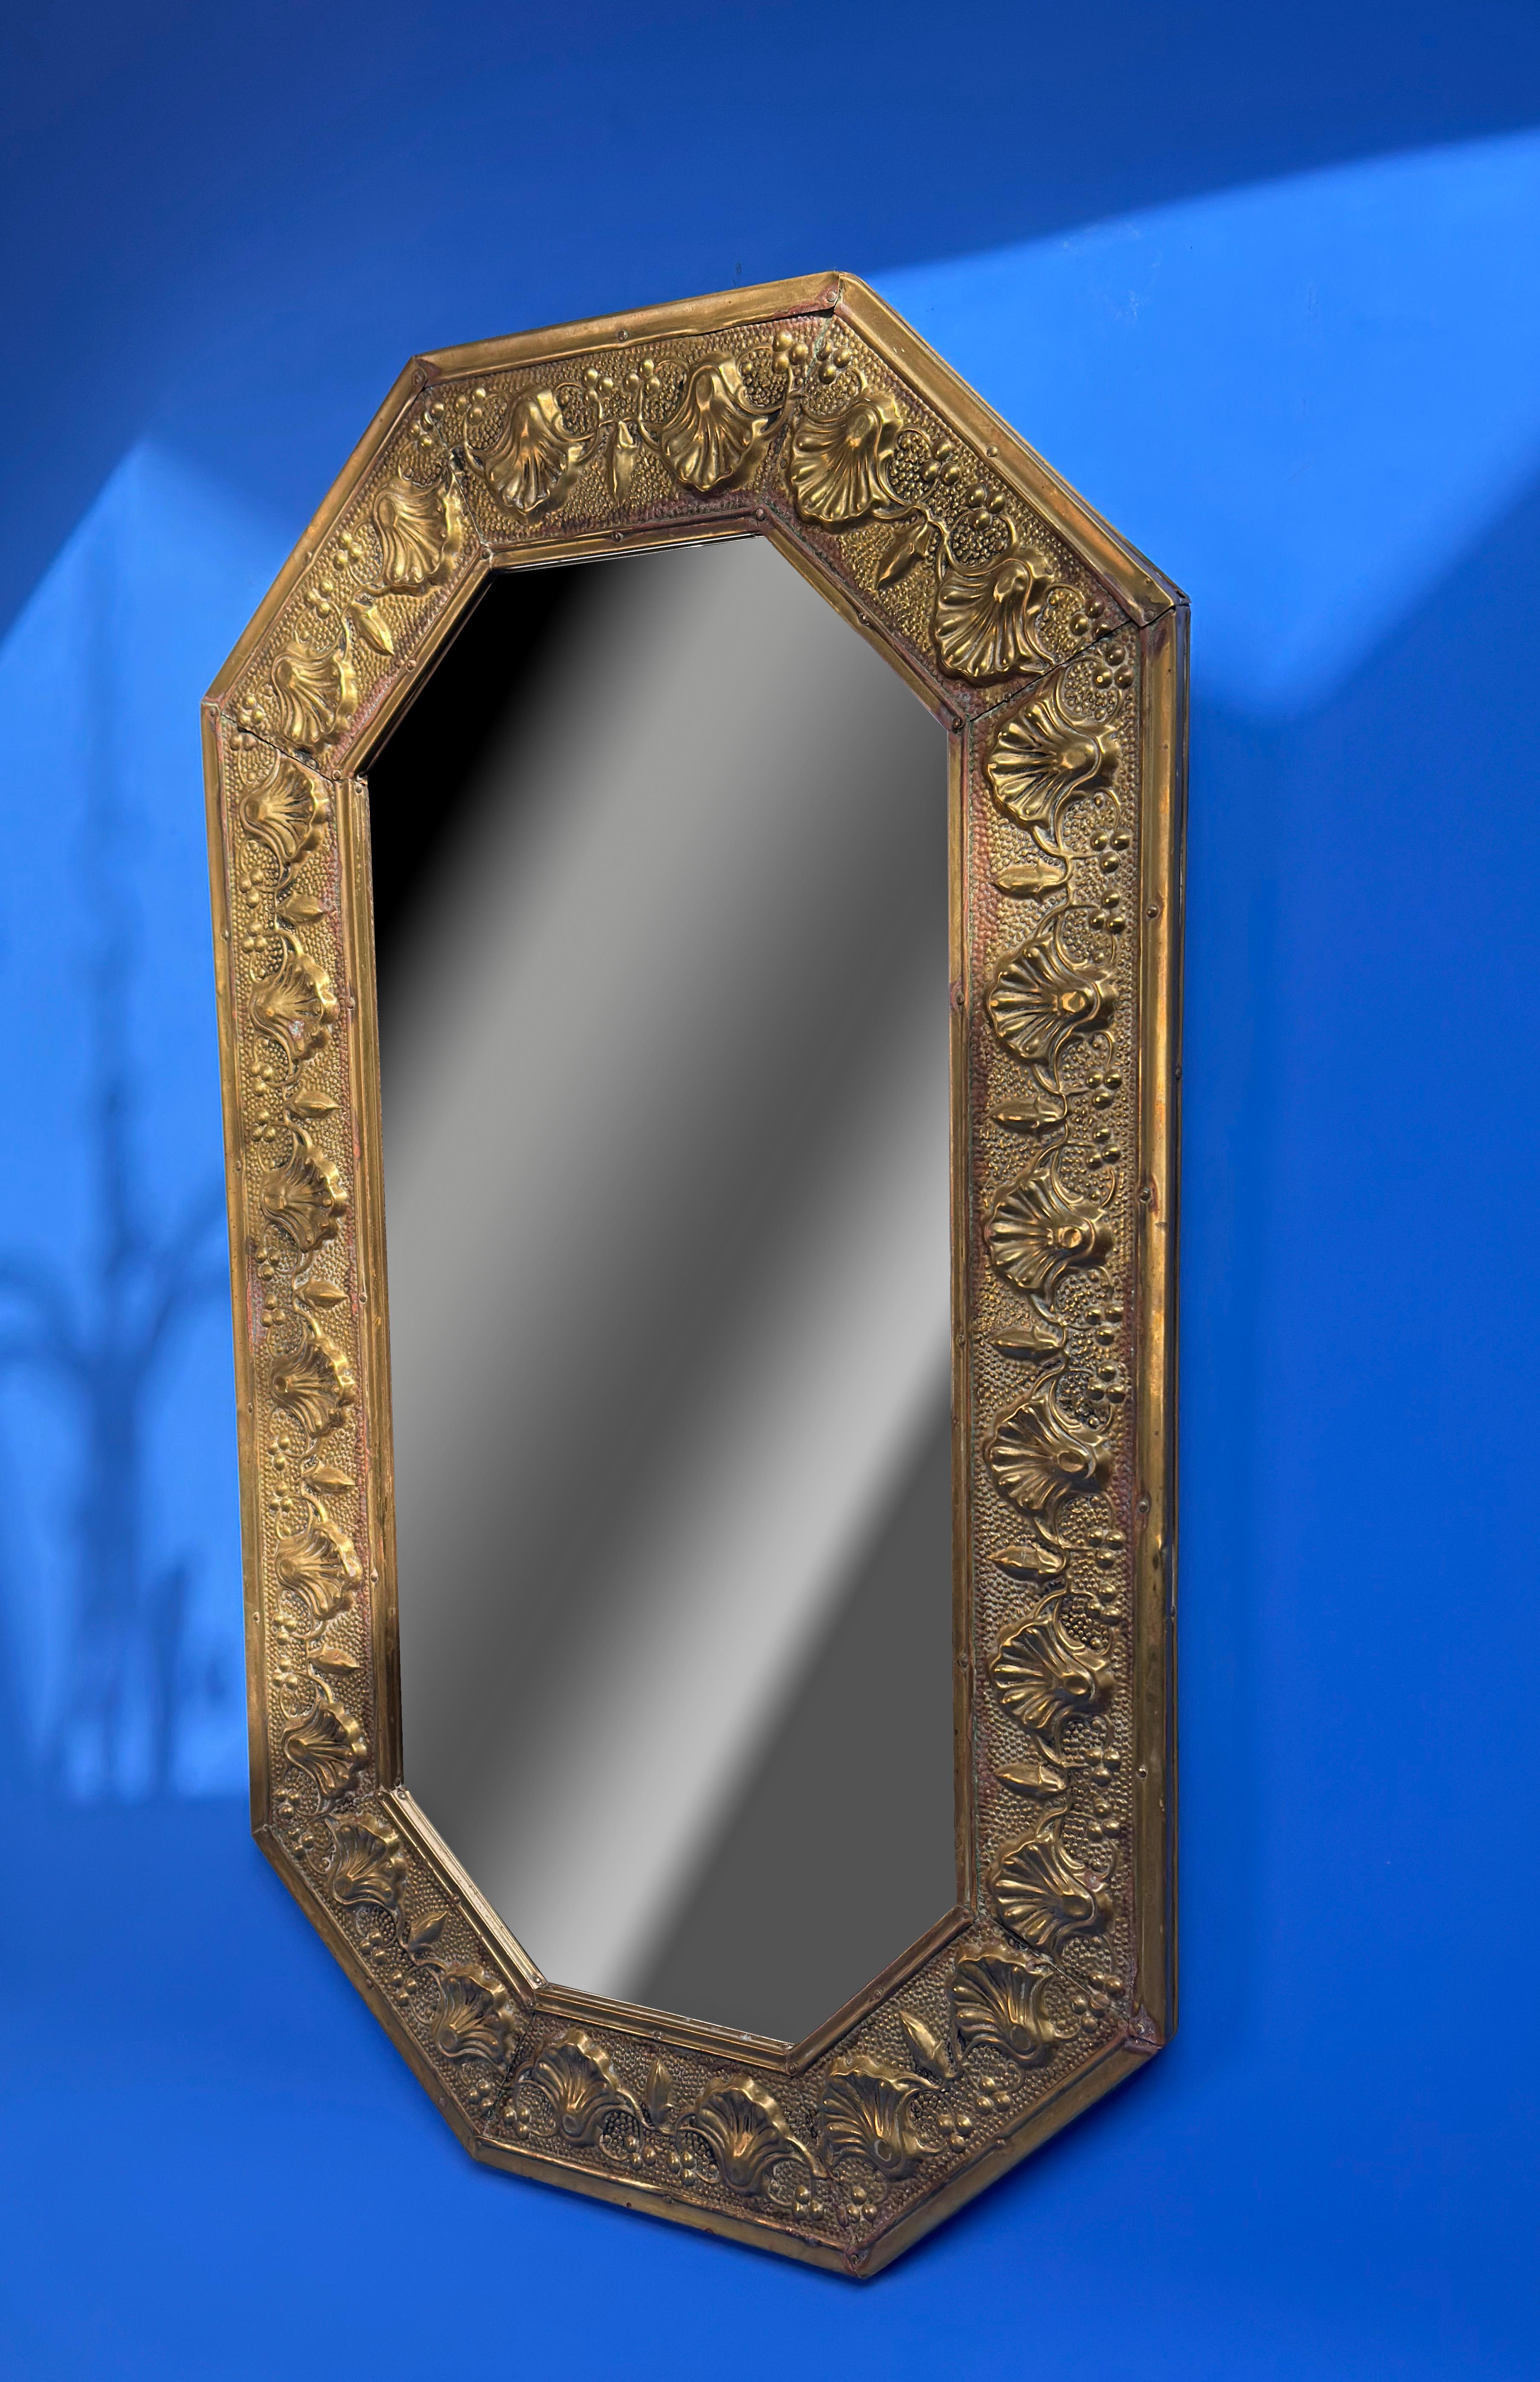 Repoussé Arts and Crafts Wall Mirror in Hammered Brass 'Repousse' - Circa 1910, England  For Sale